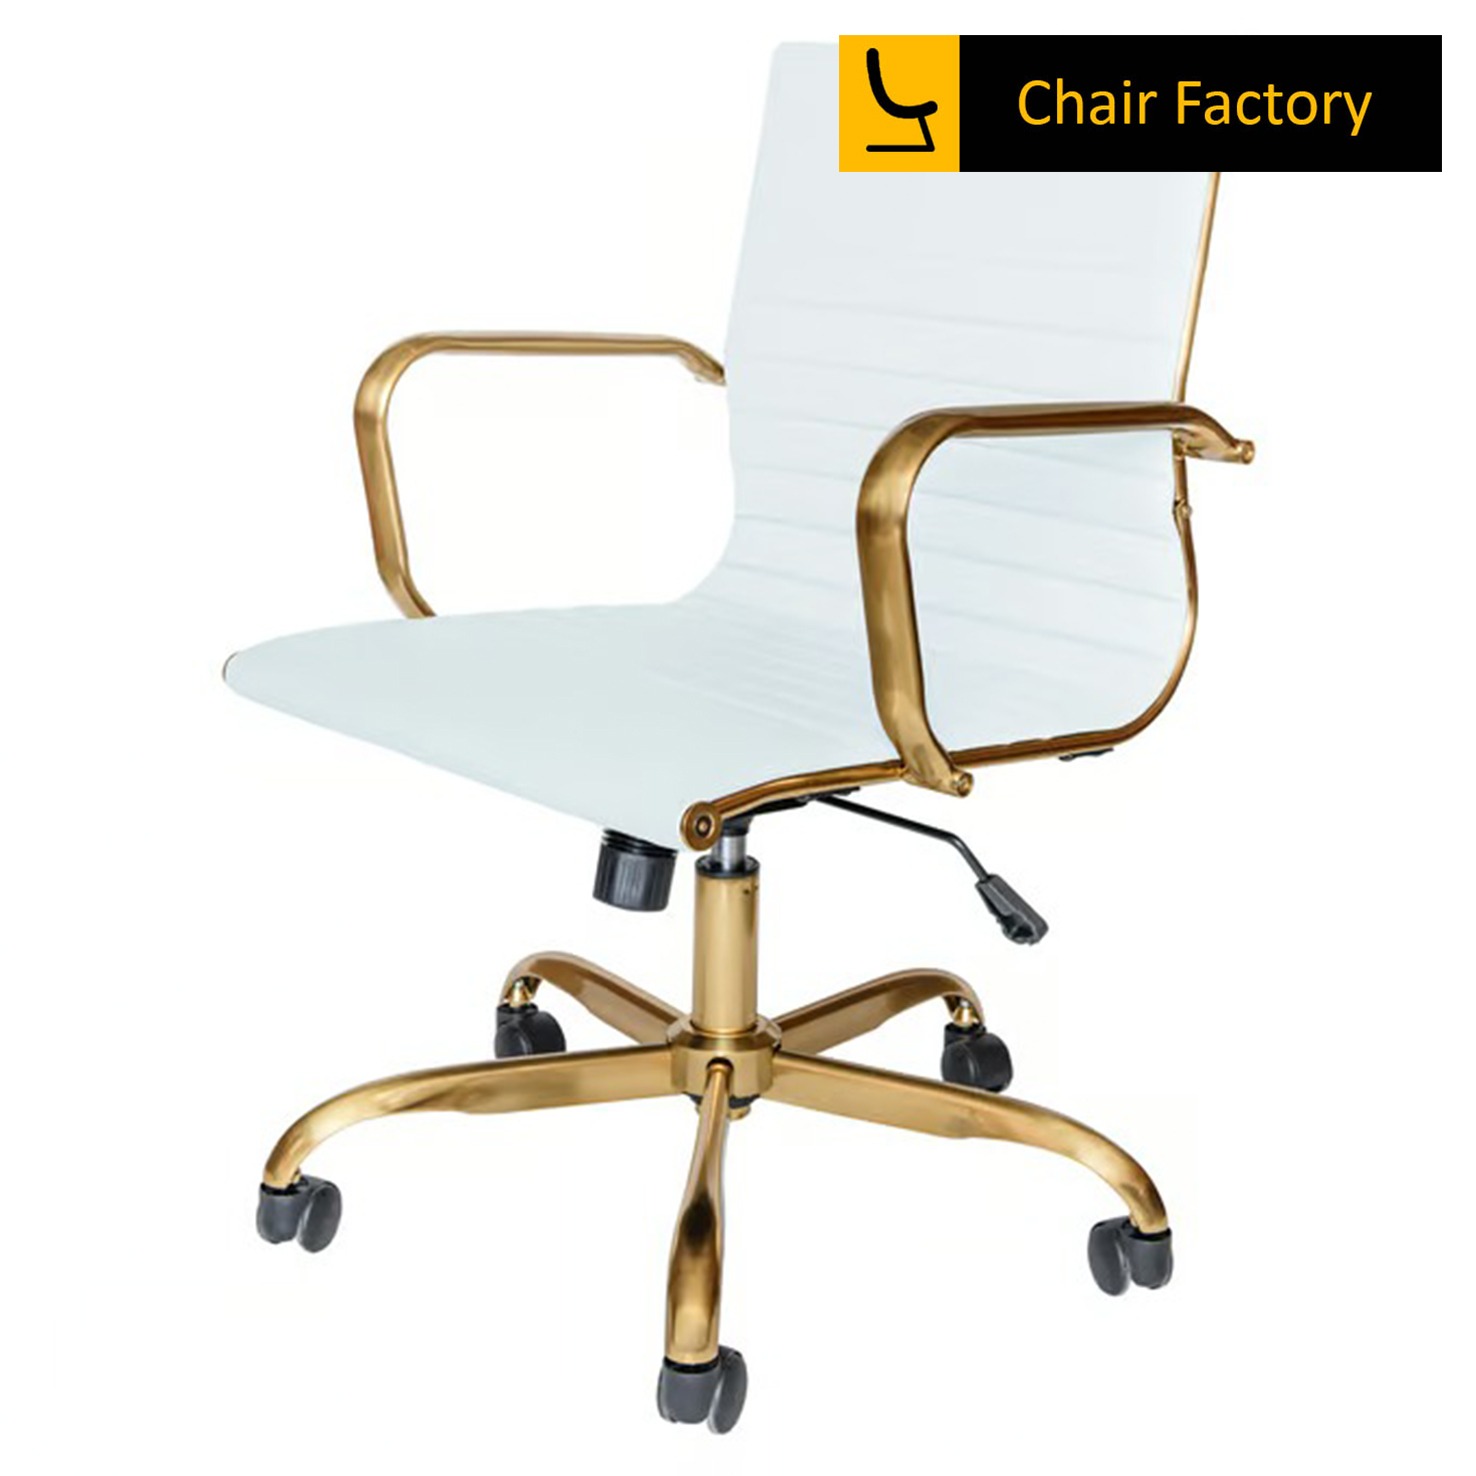 James Single Cushion Mid Back conference Room white leather Chair with gold frame